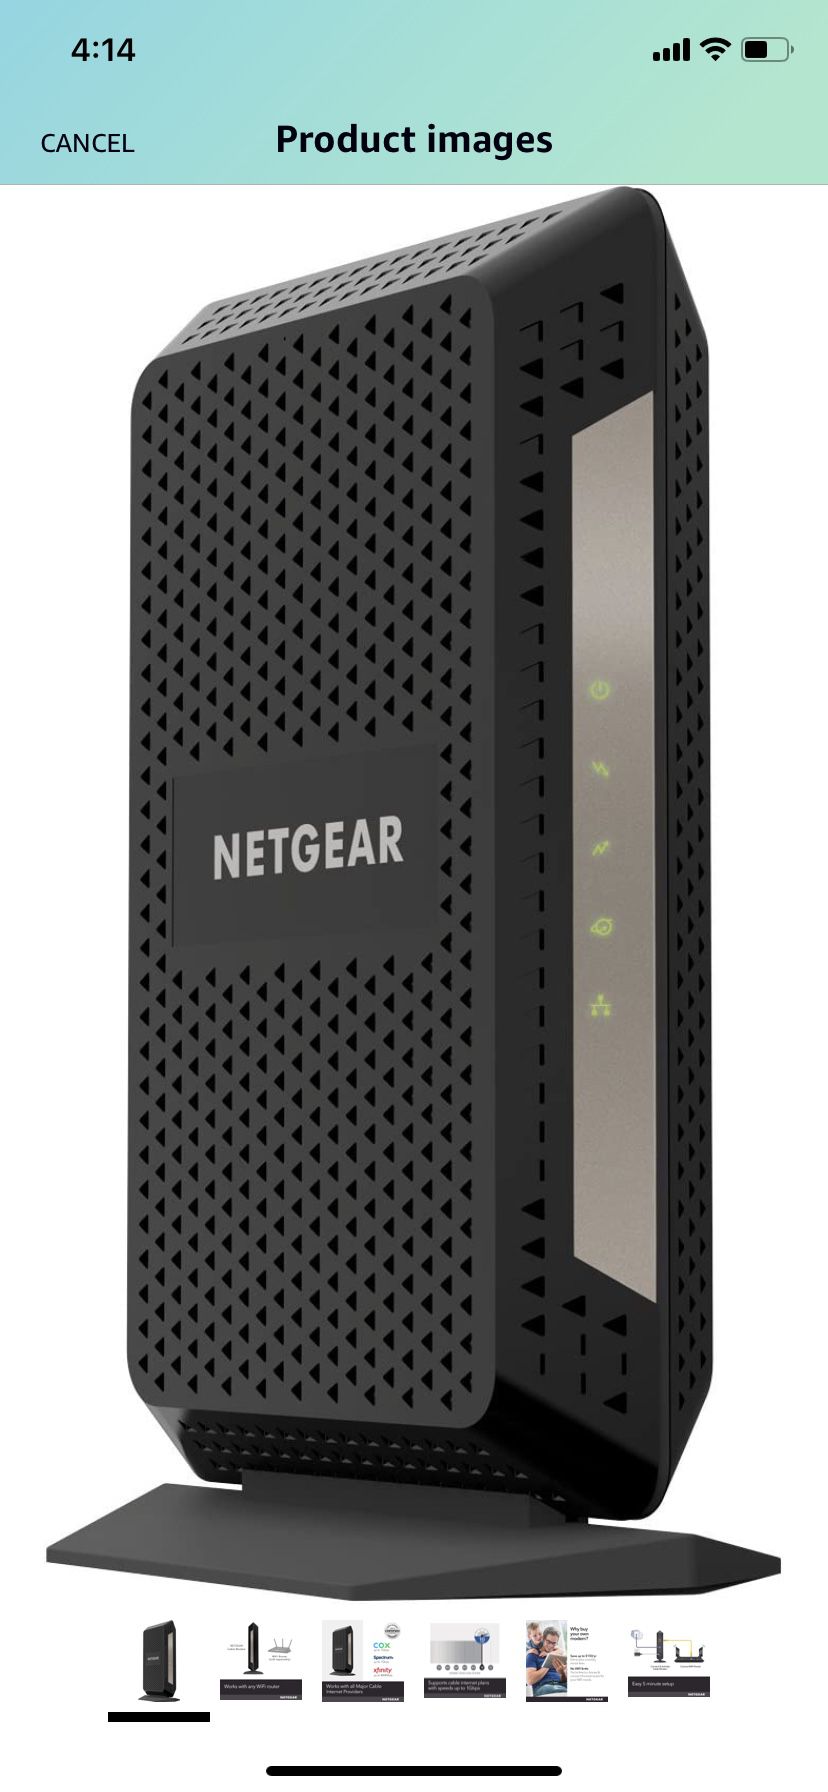 NETGEAR Cable Modem CM1000 - Compatible with All Cable Providers Including Xfinity by Comcast, Spectrum, Cox | for Cable Plans Up to 1 Gigabit | DOCSI